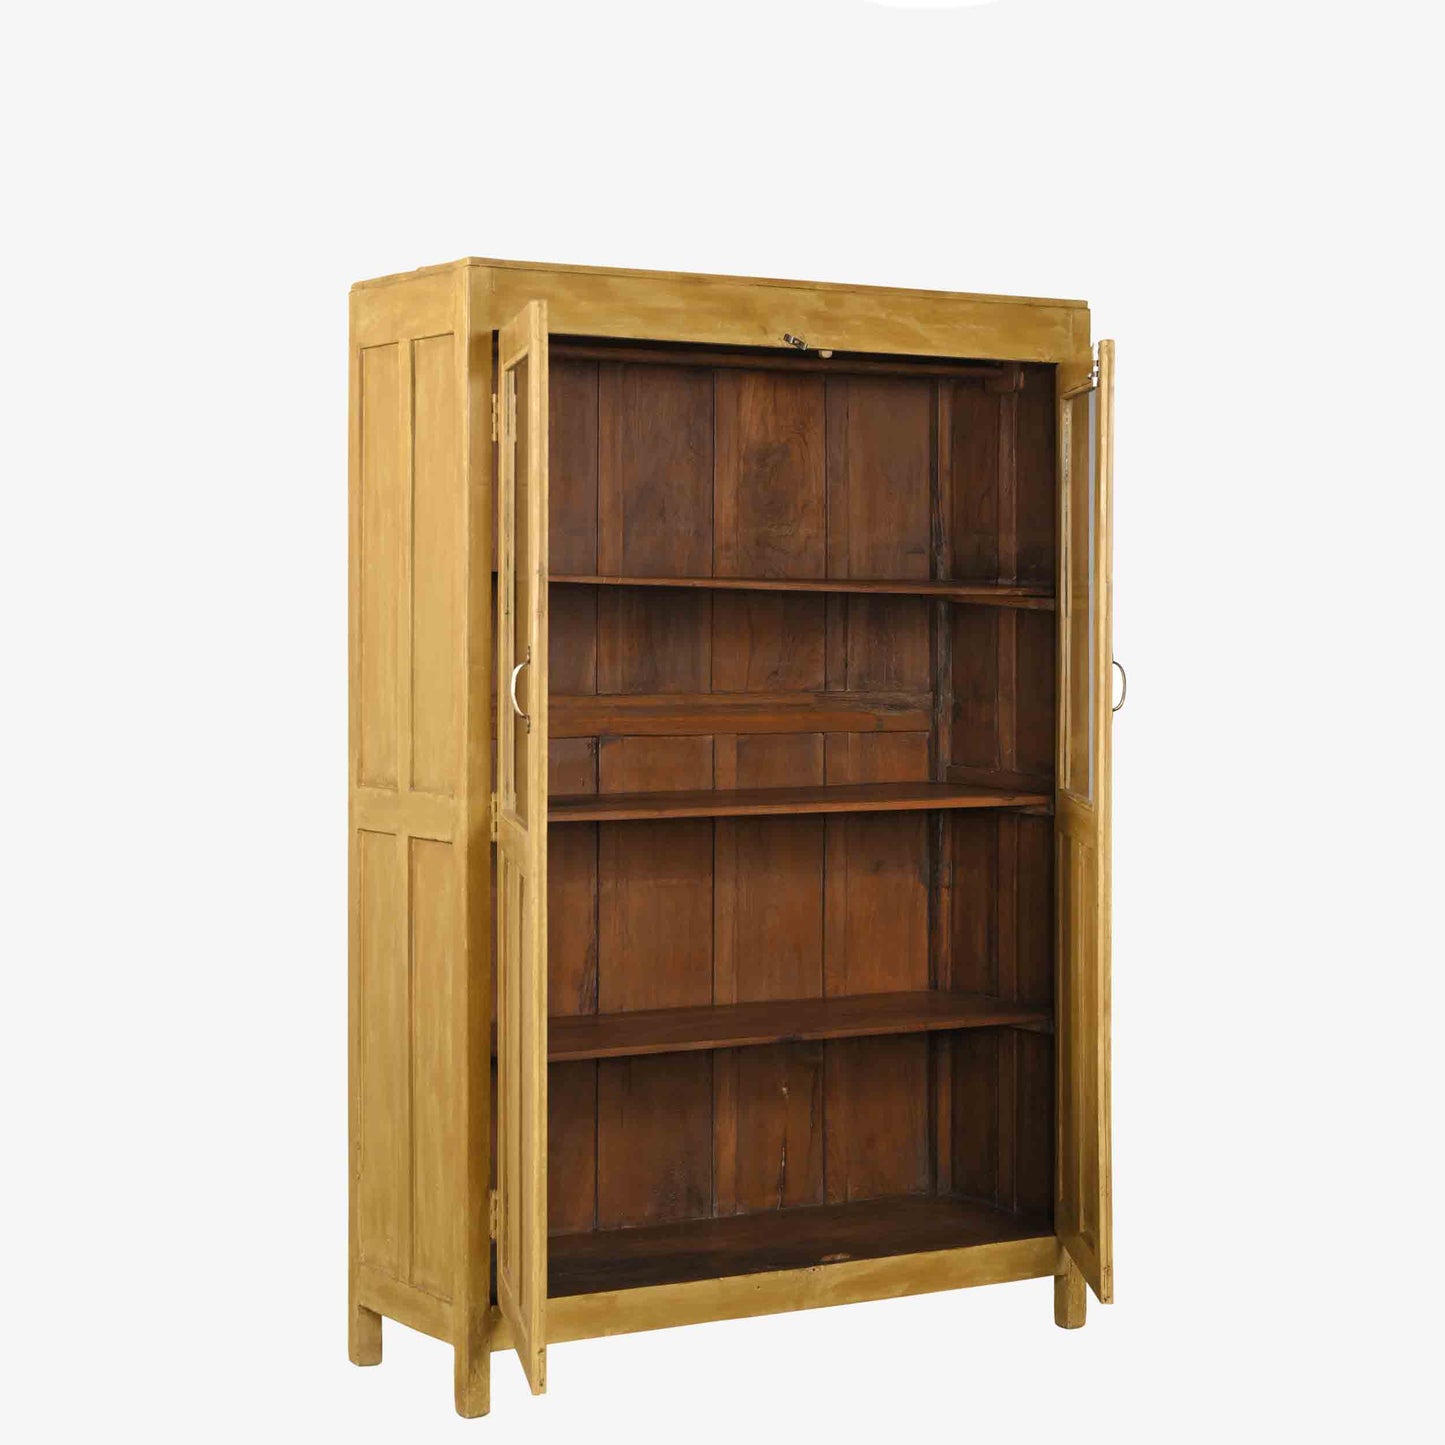 The Byrne Antique Display Dresser in Field of Wheat Yellow